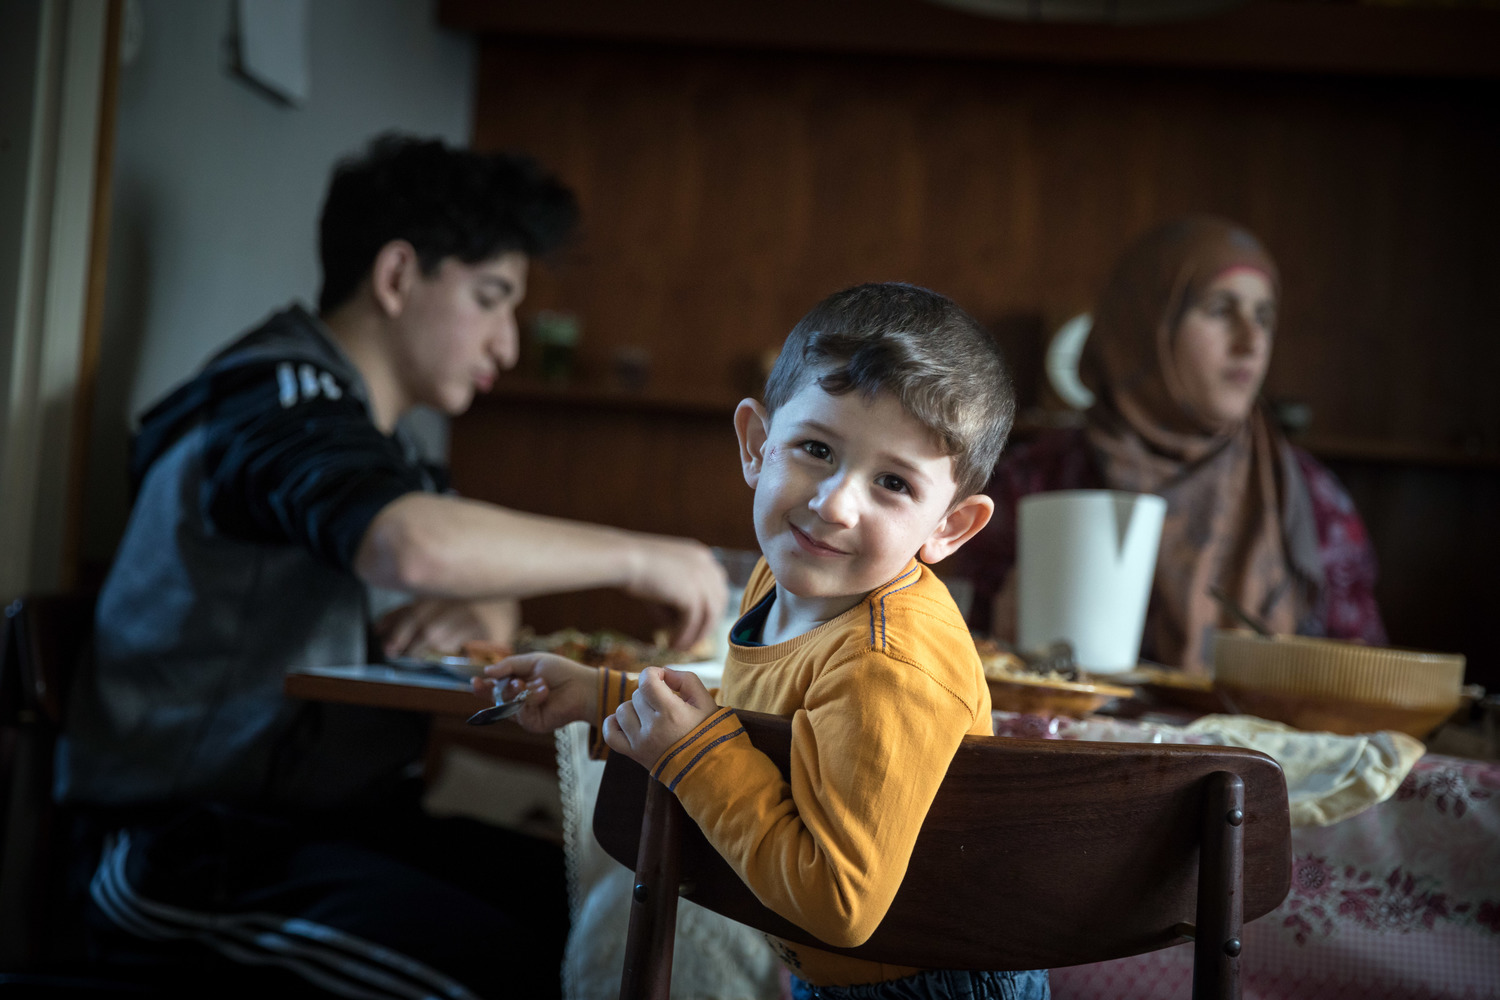 Austria. Refugees long for reunion with loved ones left behind.